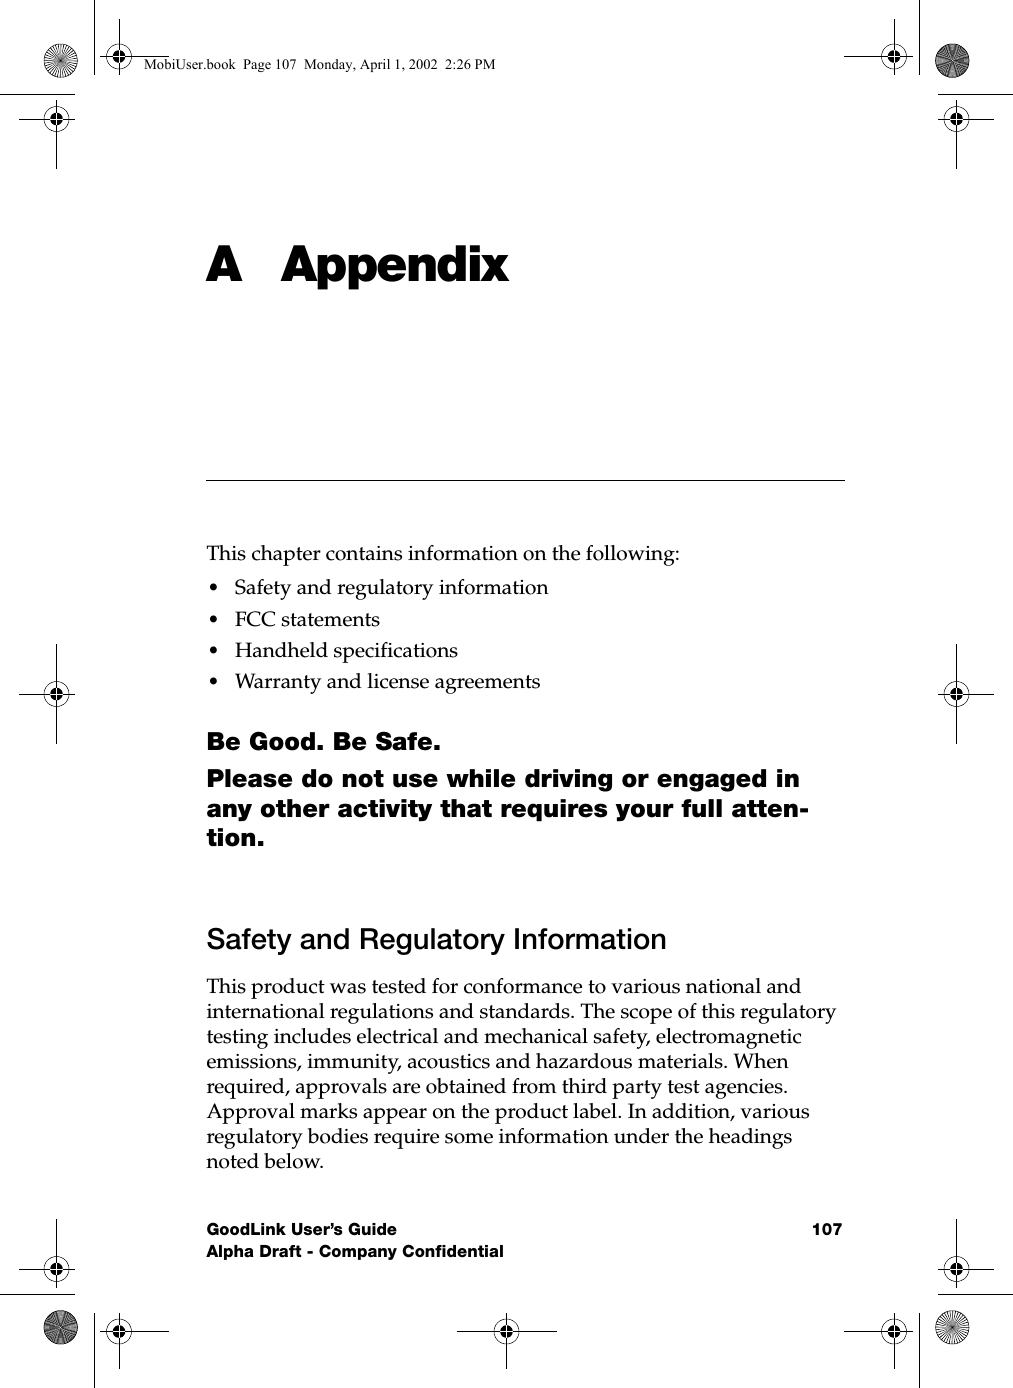 GoodLink User’s Guide 107Alpha Draft - Company ConfidentialA AppendixThis chapter contains information on the following:•Safety and regulatory information•FCC statements•Handheld specifications•Warranty and license agreementsBe Good. Be Safe.Please do not use while driving or engaged in any other activity that requires your full atten-tion.Safety and Regulatory InformationThis product was tested for conformance to various national and international regulations and standards. The scope of this regulatory testing includes electrical and mechanical safety, electromagnetic emissions, immunity, acoustics and hazardous materials. When required, approvals are obtained from third party test agencies. Approval marks appear on the product label. In addition, various regulatory bodies require some information under the headings noted below.MobiUser.book  Page 107  Monday, April 1, 2002  2:26 PM